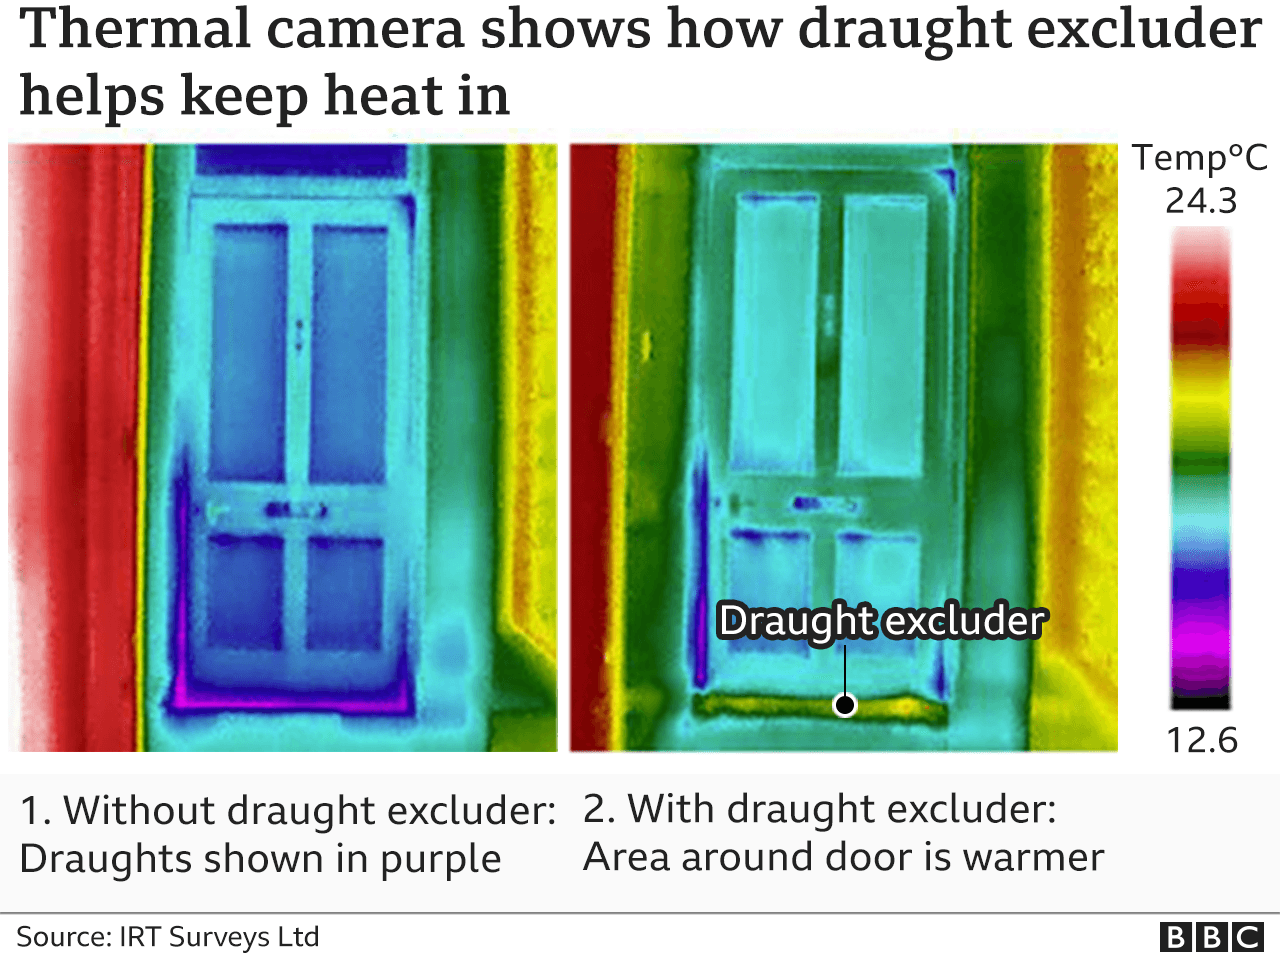 Thermal images show draught excluder helps room heat up